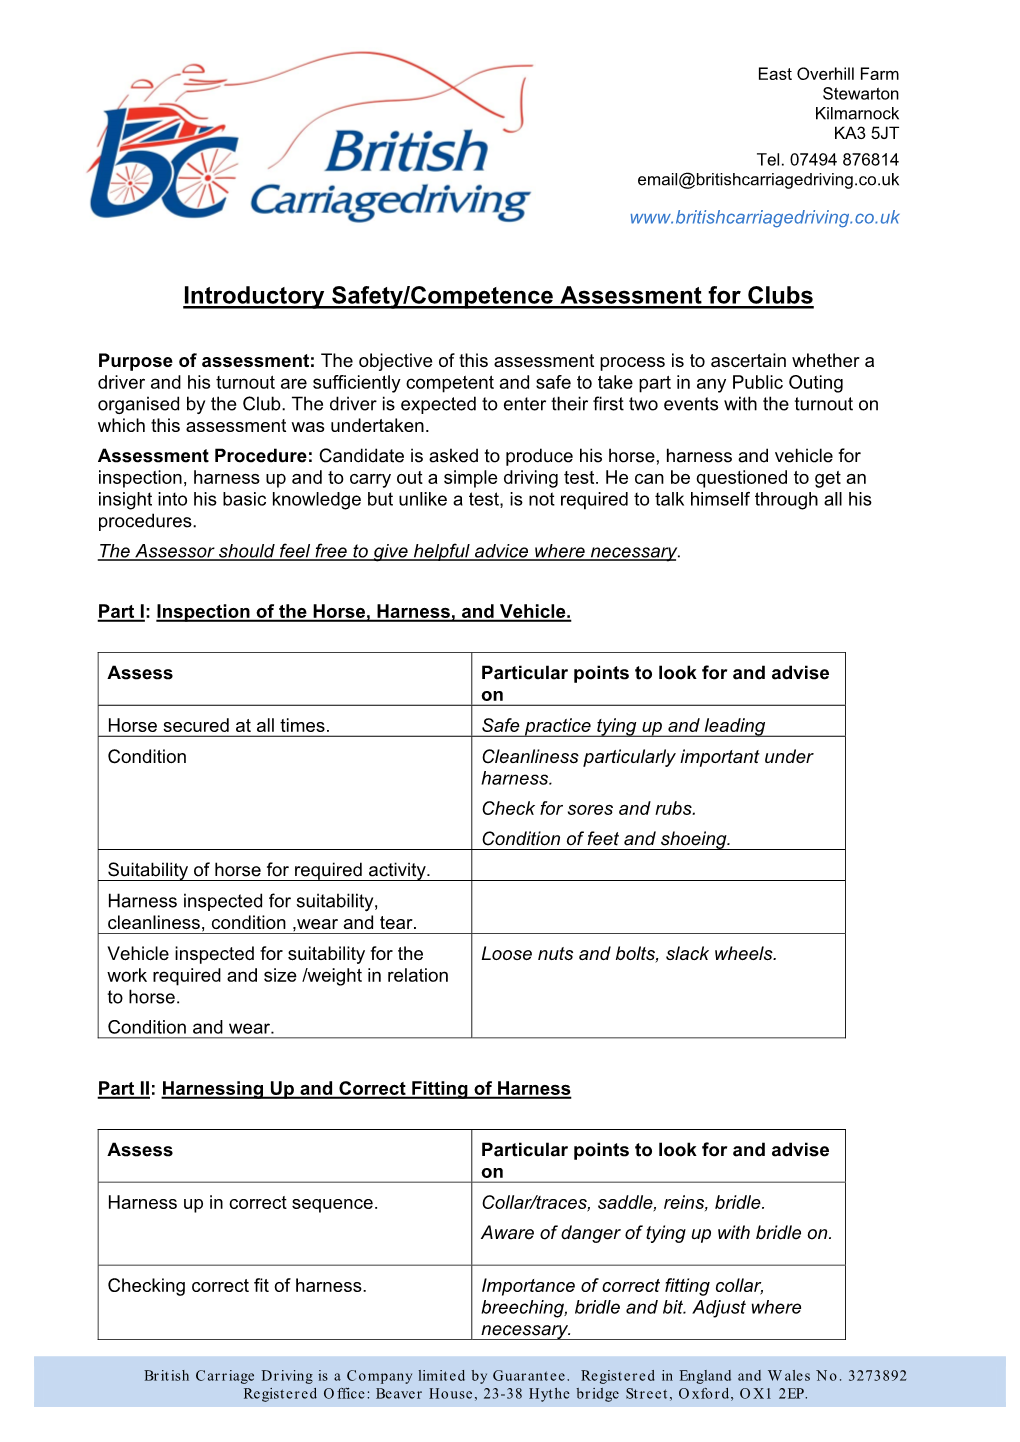 Introductory Safety Competence Assessment for Clubs